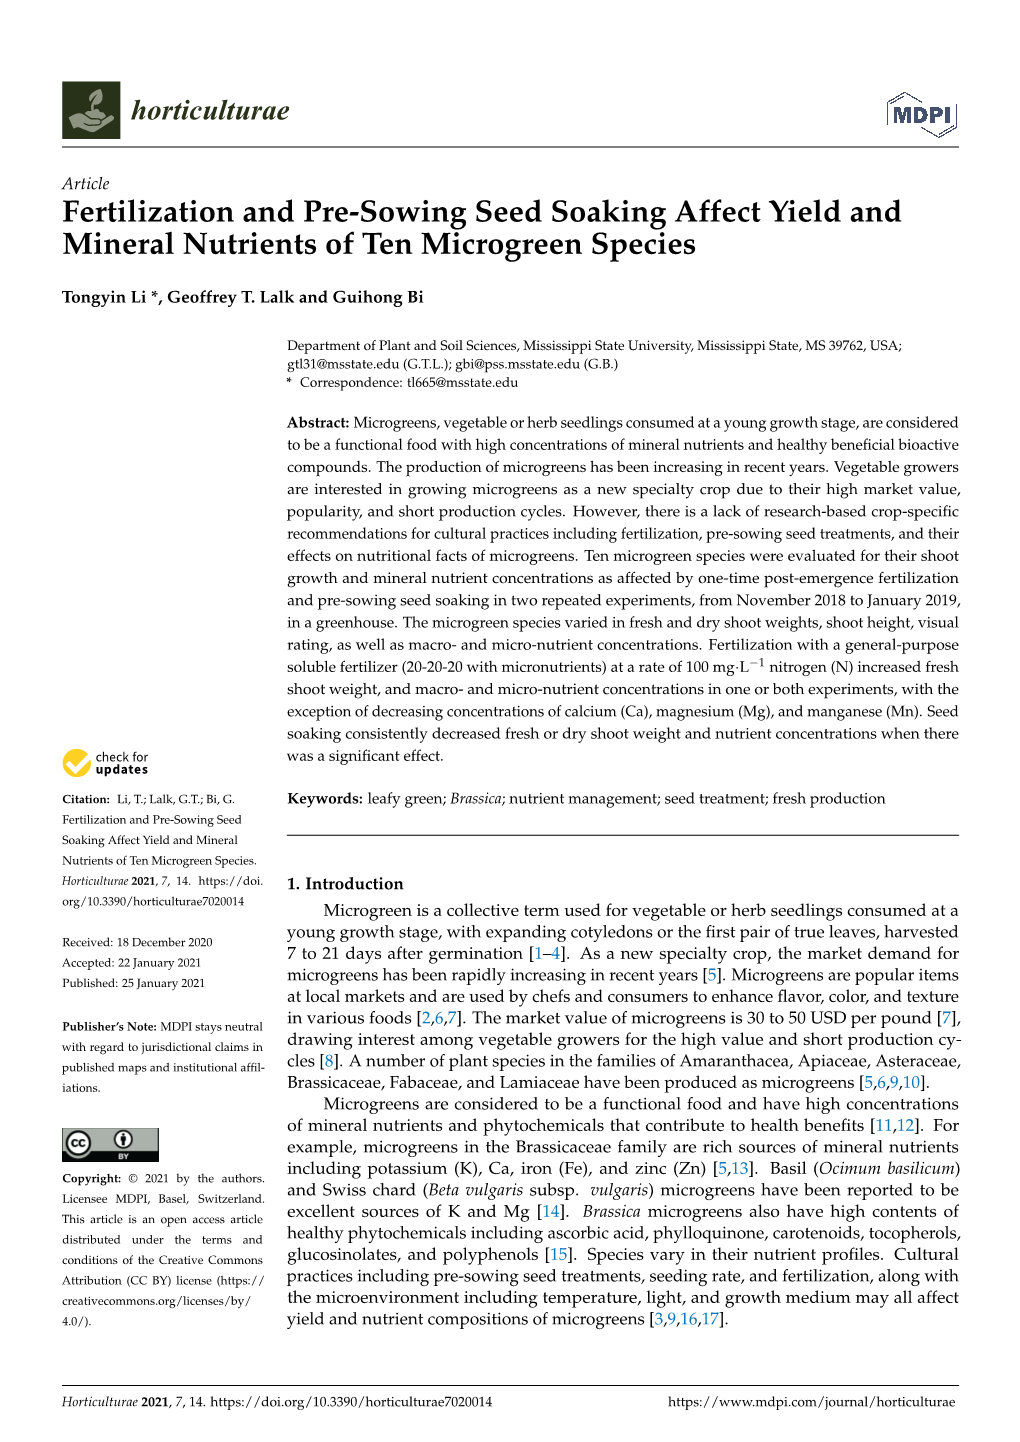 Fertilization and Pre-Sowing Seed Soaking Affect Yield and Mineral Nutrients of Ten Microgreen Species